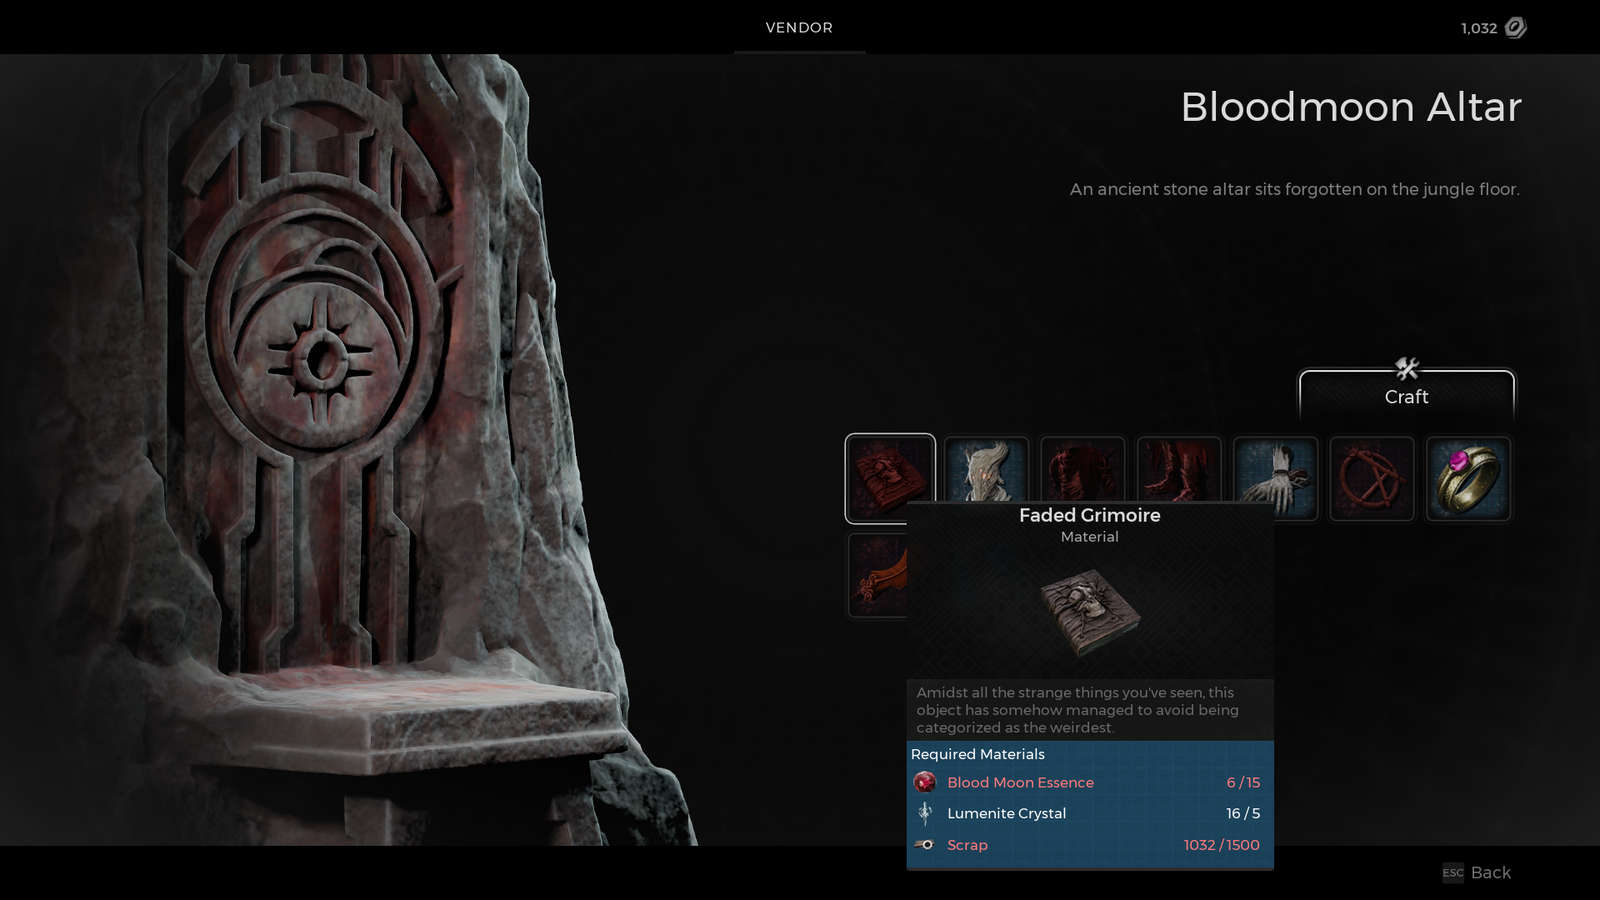 Remnant 2 faded grimoire costs 15 bloodmoon essence at bloodmoon altar